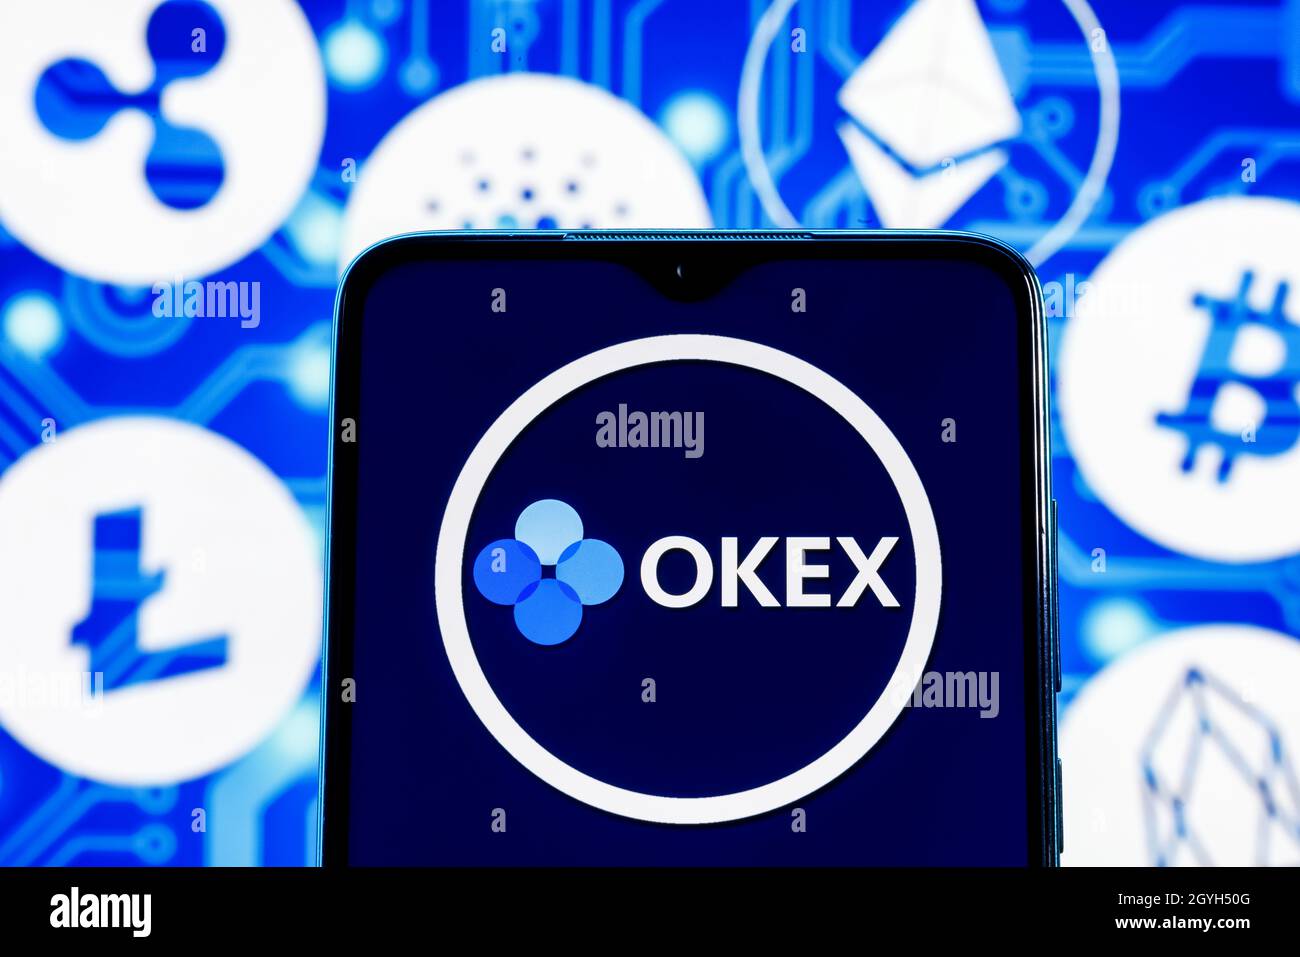 OKEx is a cryptocurrency exchange. OKEx logo on smartphone screen against the background of the main cryptocurrencies. Stock Photo